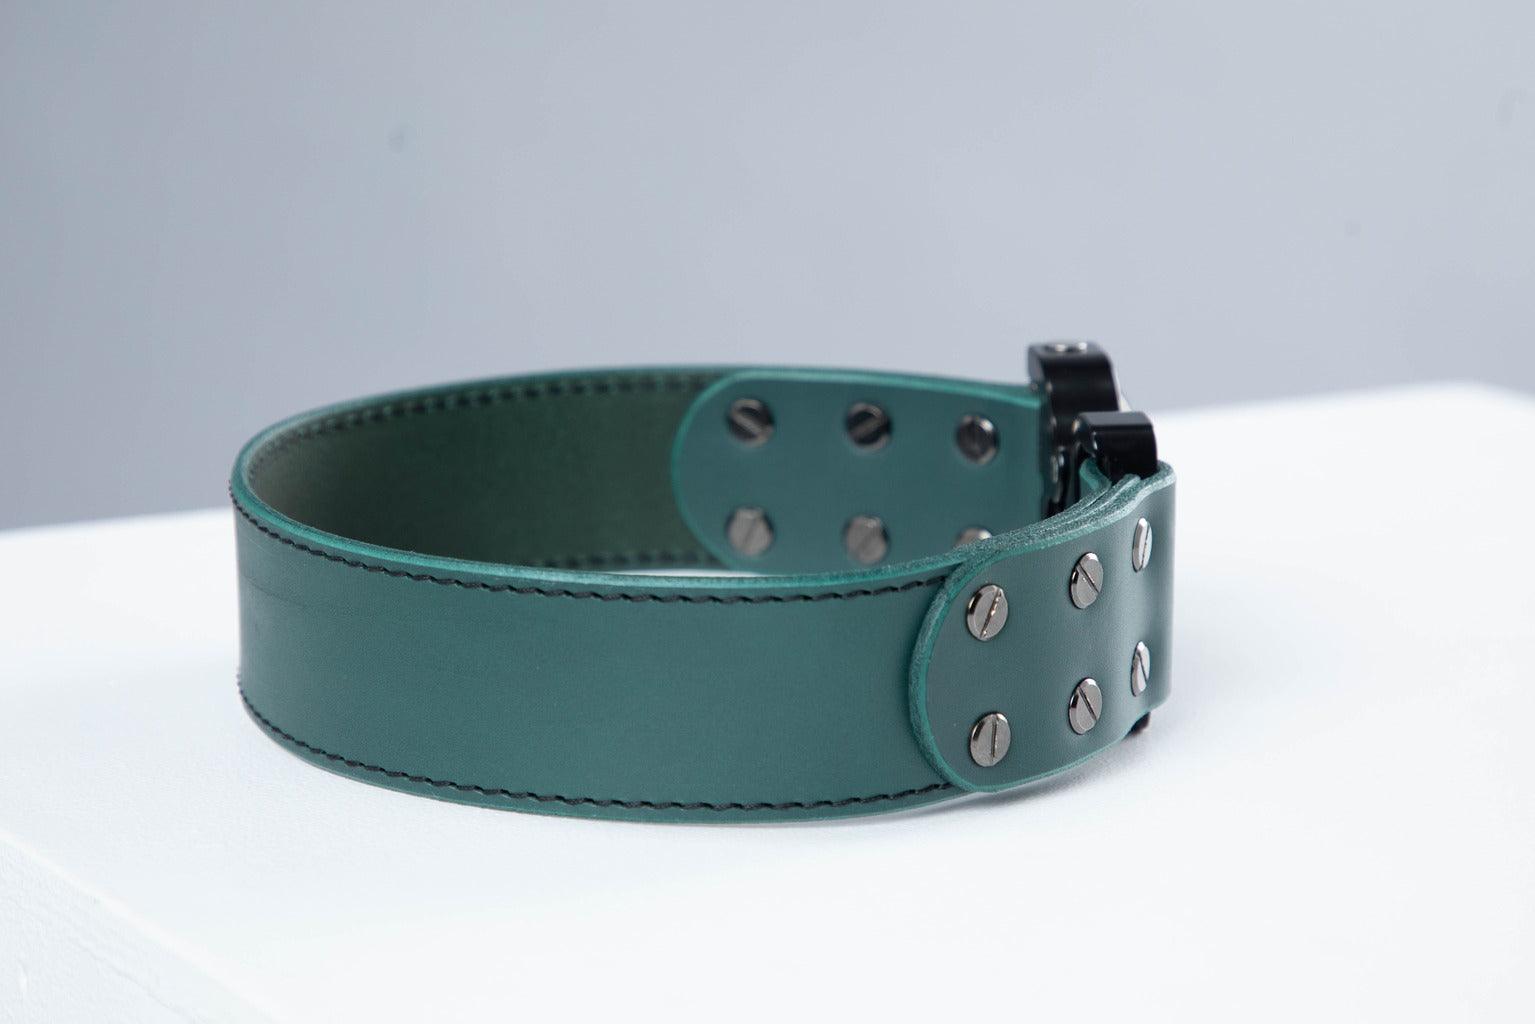 Green leather dog collar with COBRA® buckle - premium dog goods handmade in Europe by My Wild Other